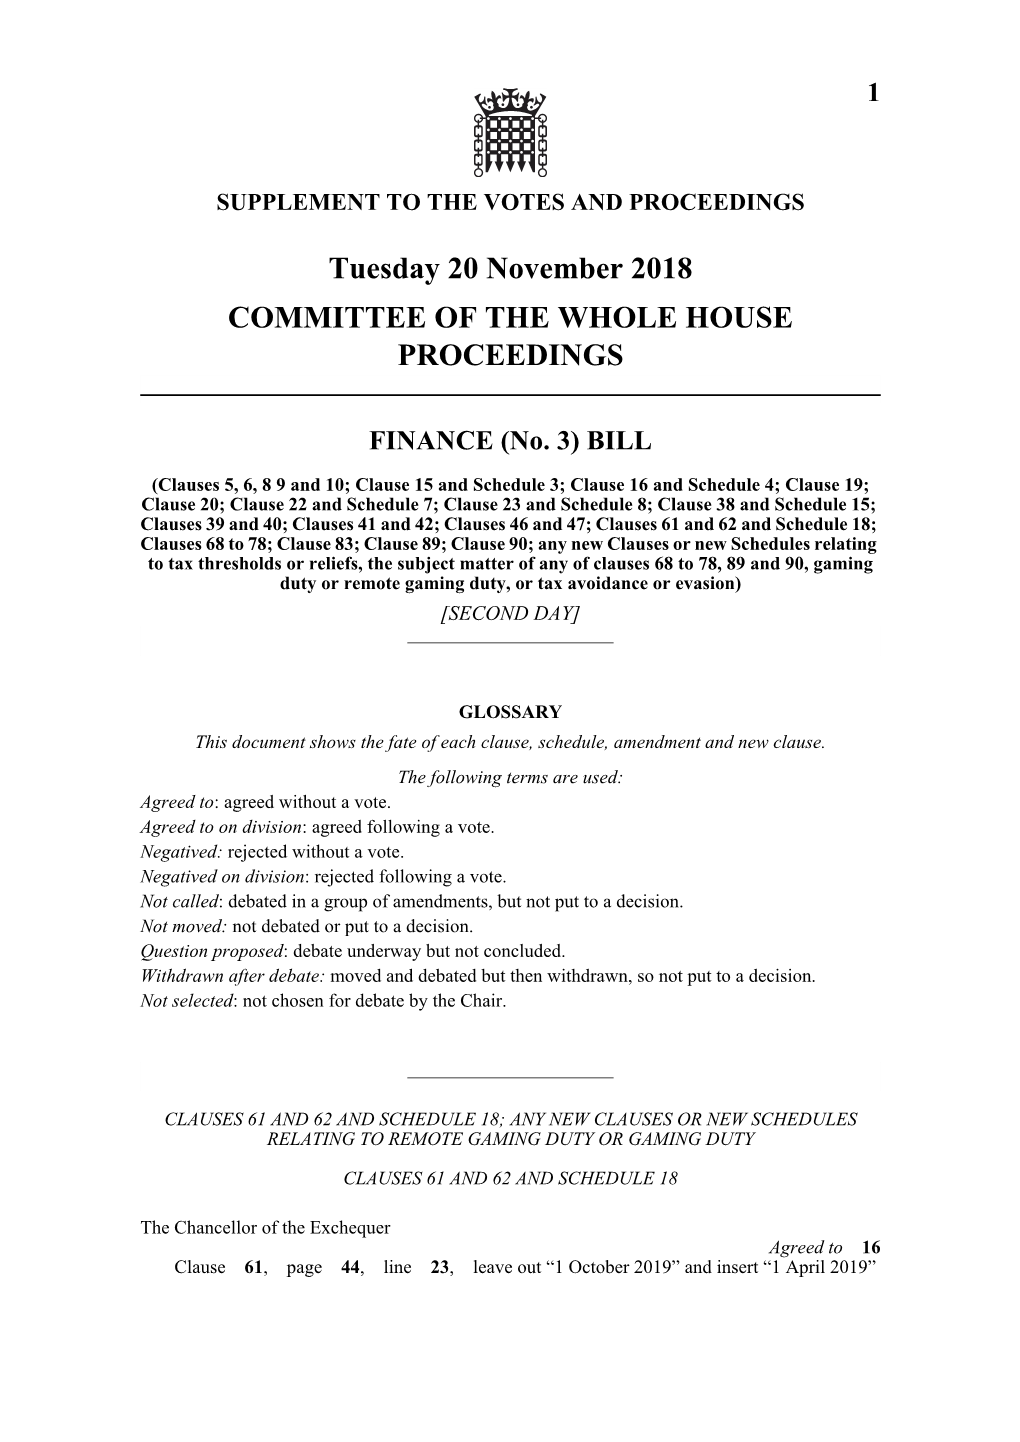 Tuesday 20 November 2018 COMMITTEE of the WHOLE HOUSE PROCEEDINGS